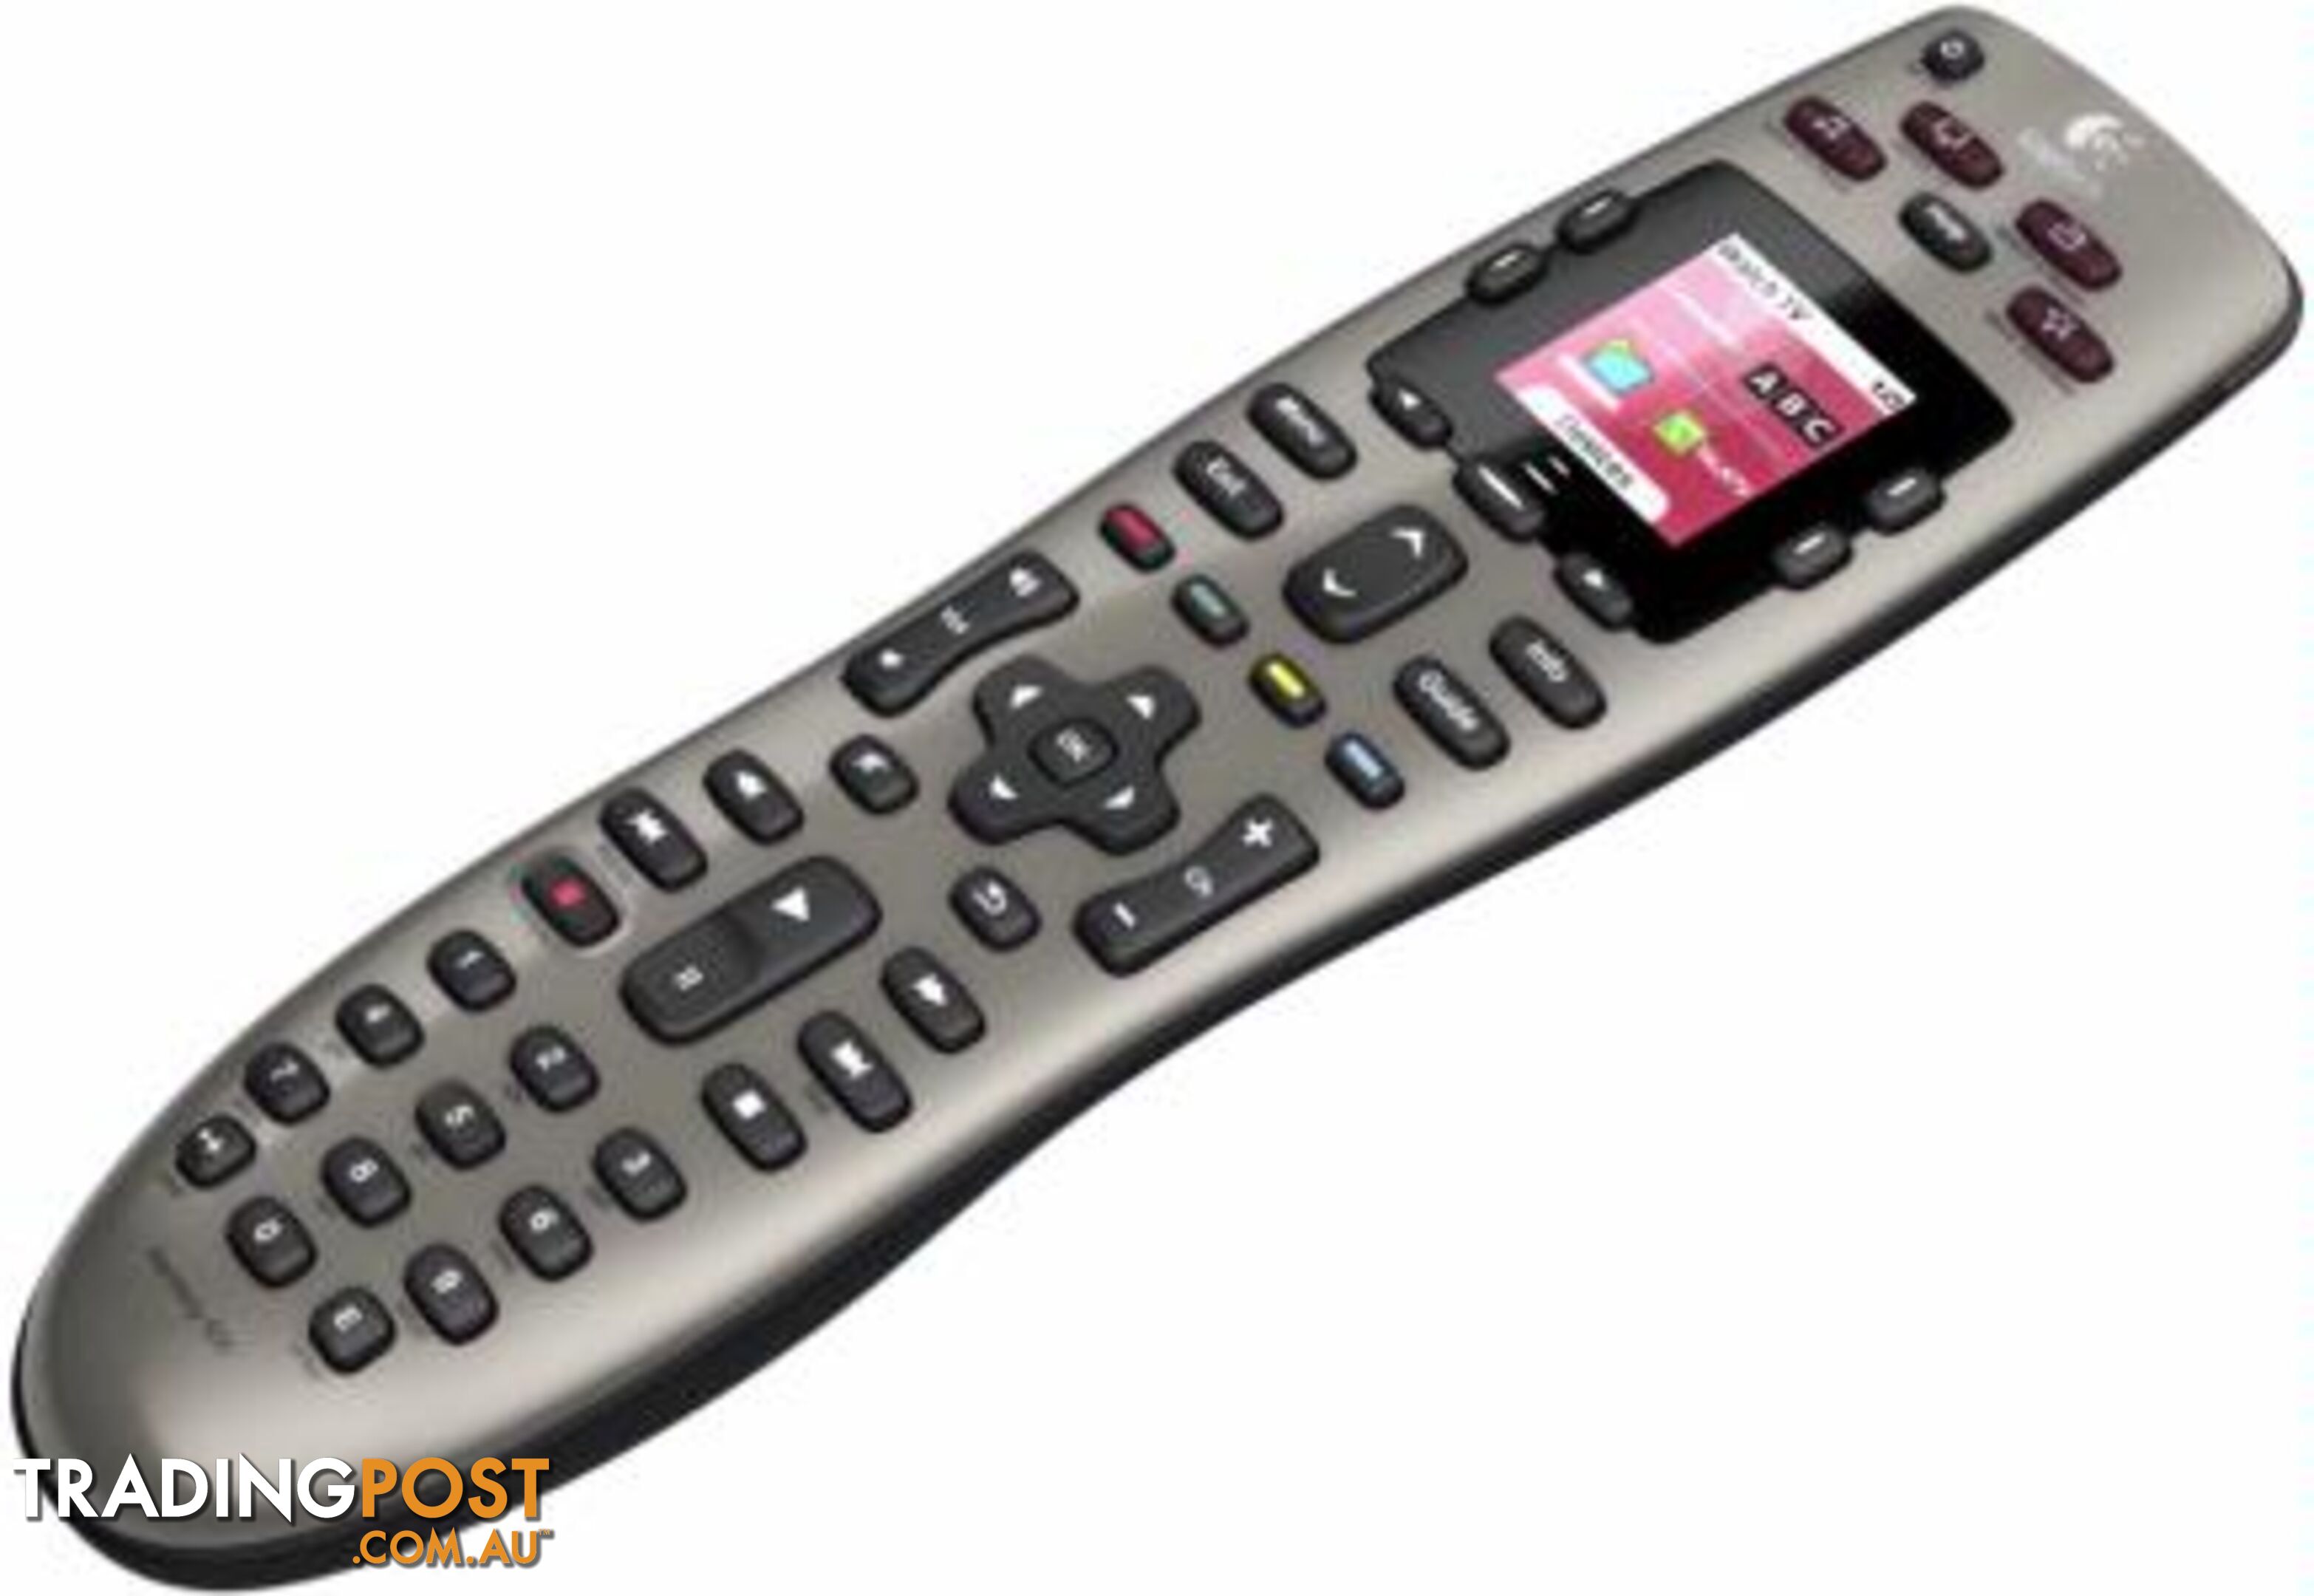 Logitech Harmony 650 Remote Universal Remote Control Colour smart display One-click activity buttons Replaces 8 remotes Intuitive design - MILT-HARMONY650